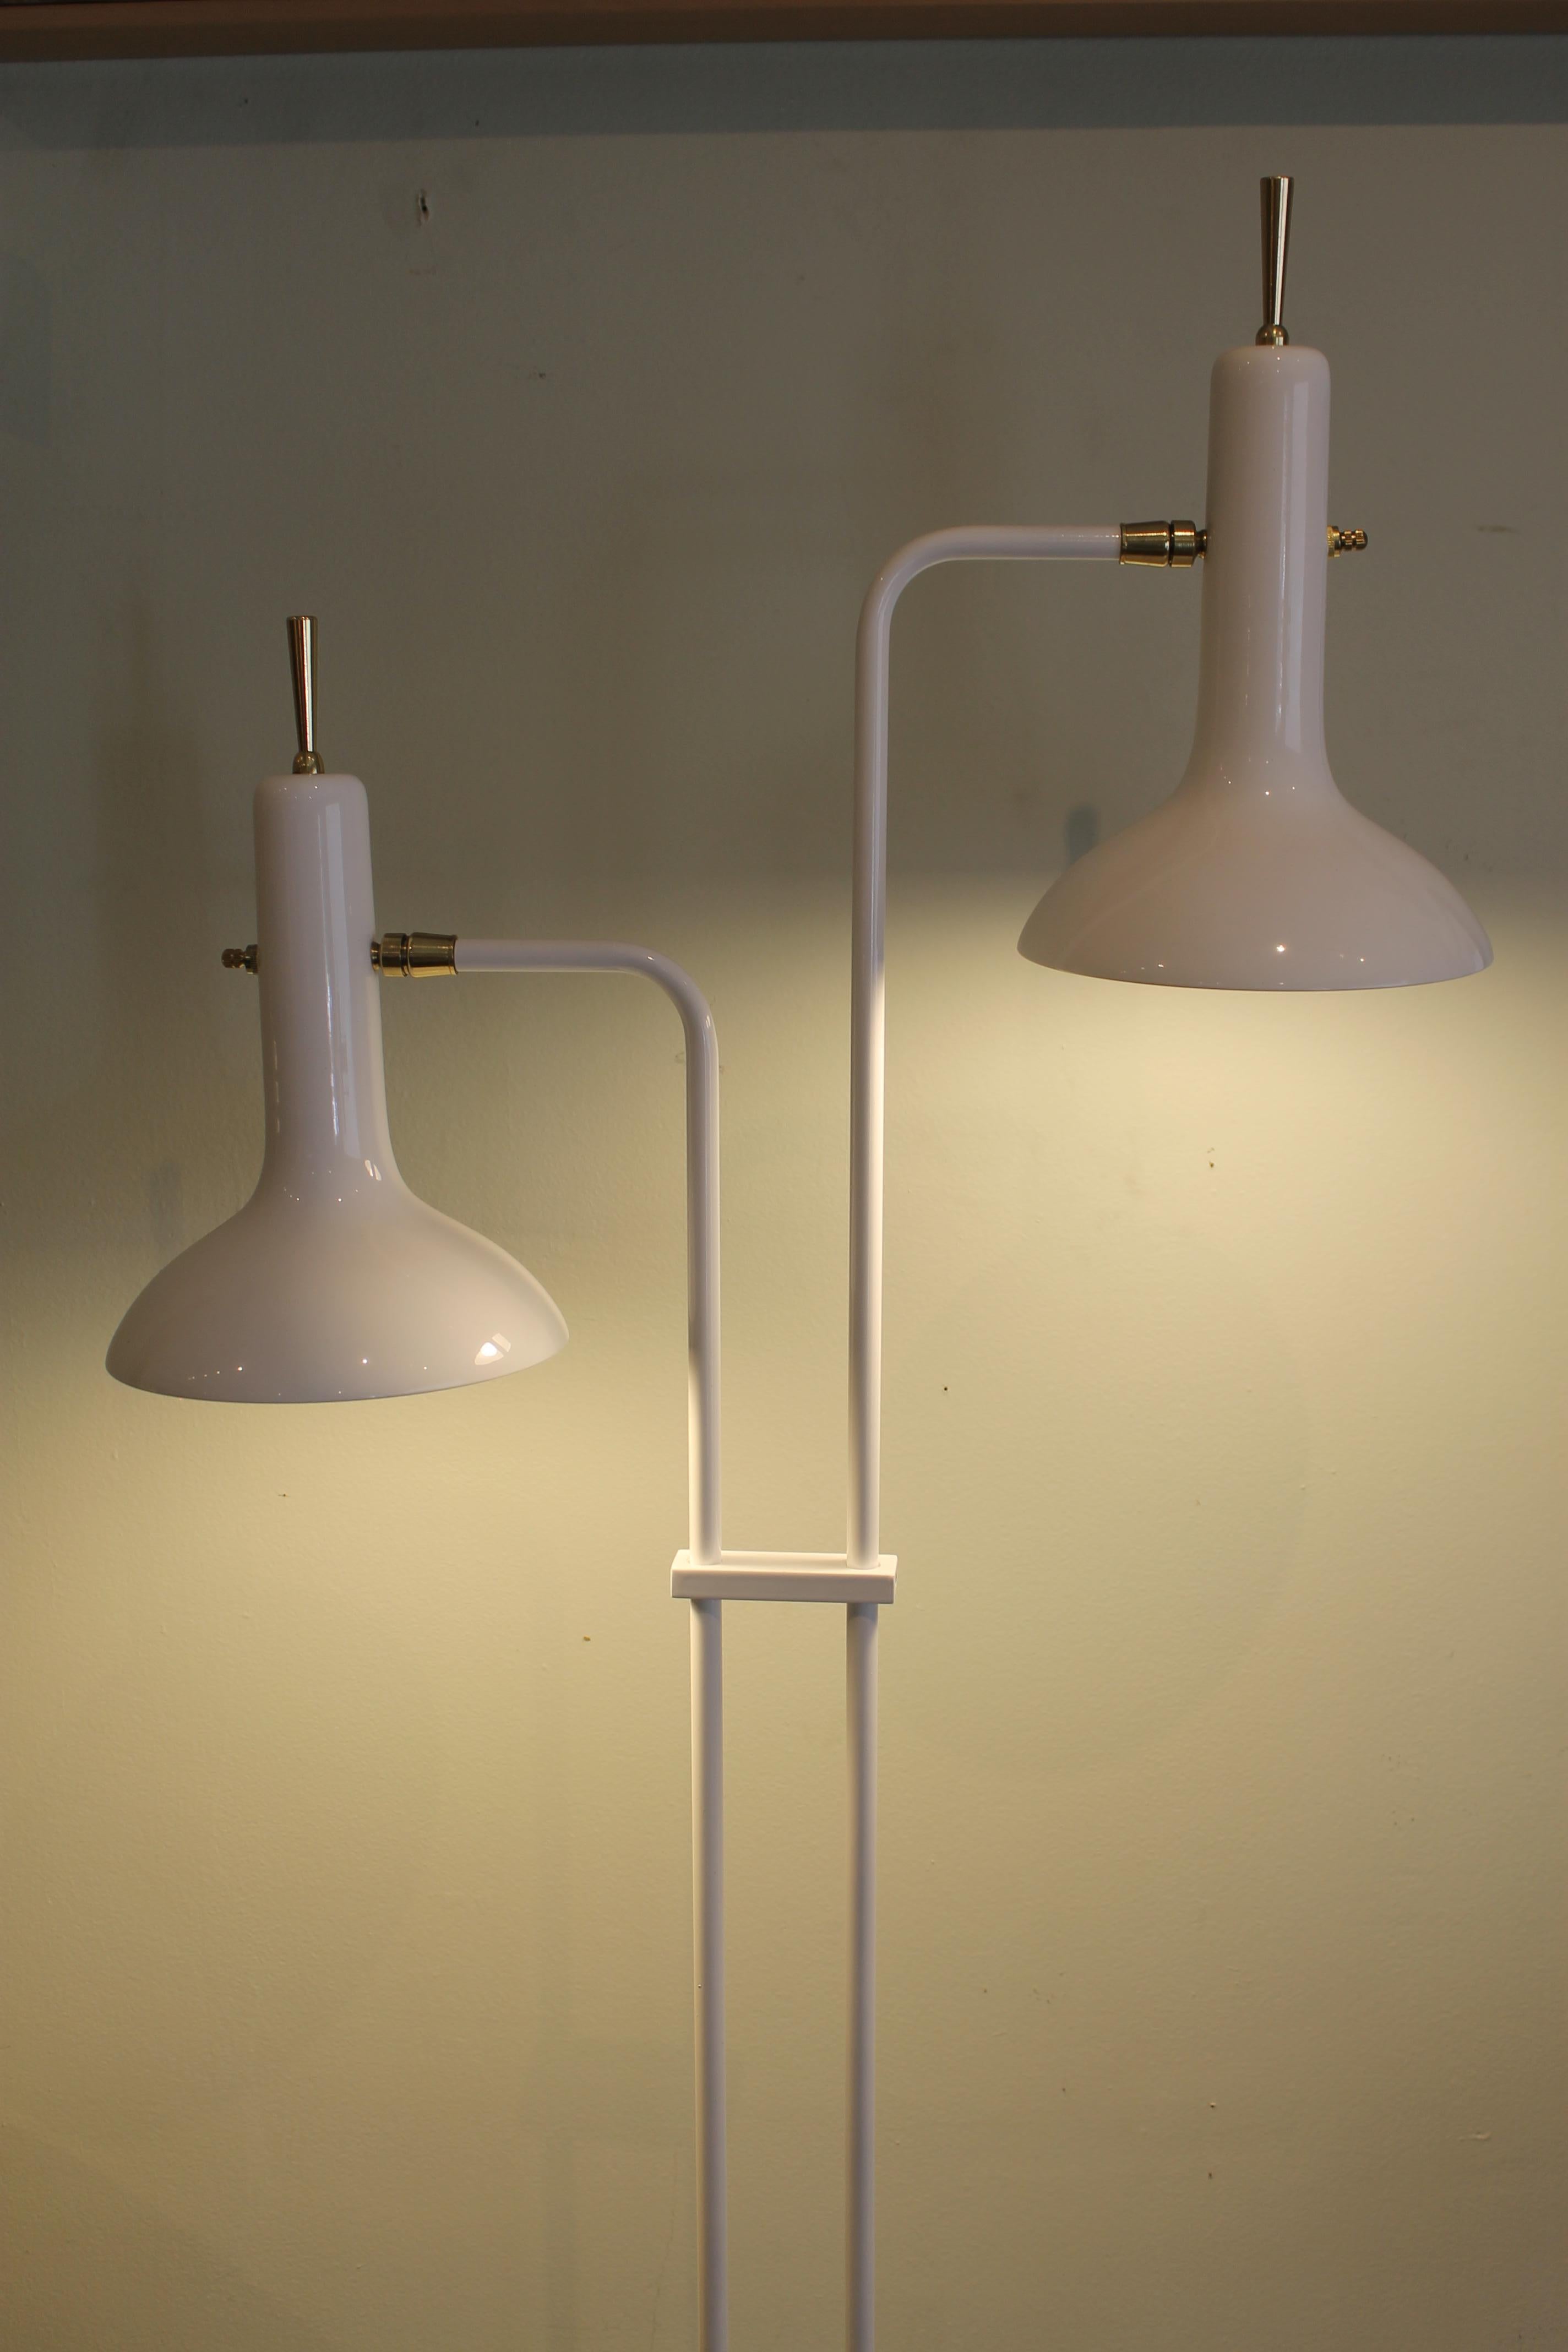 Mid-Century Modern Double Cone Floor Lamp by the Laurel Lamp Mfg. Co.